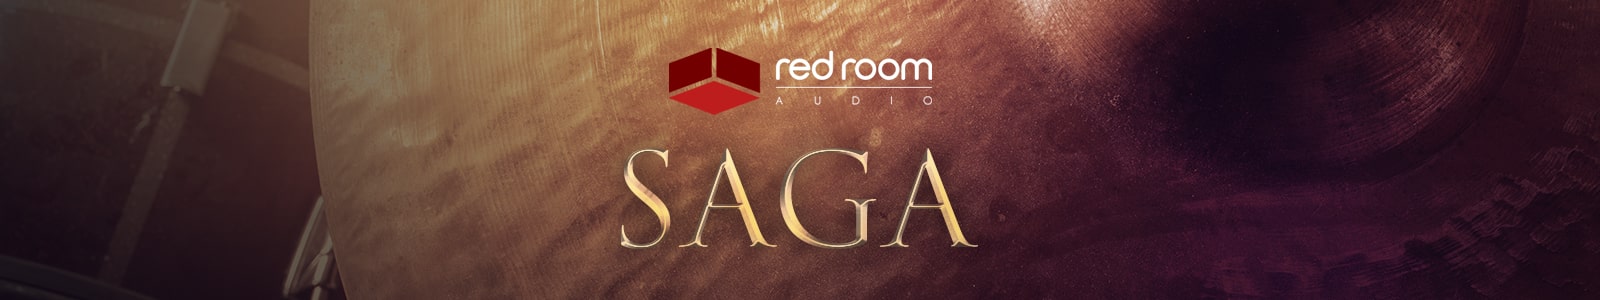 Saga Acoustic Trailer Percussion by Red Room Audio